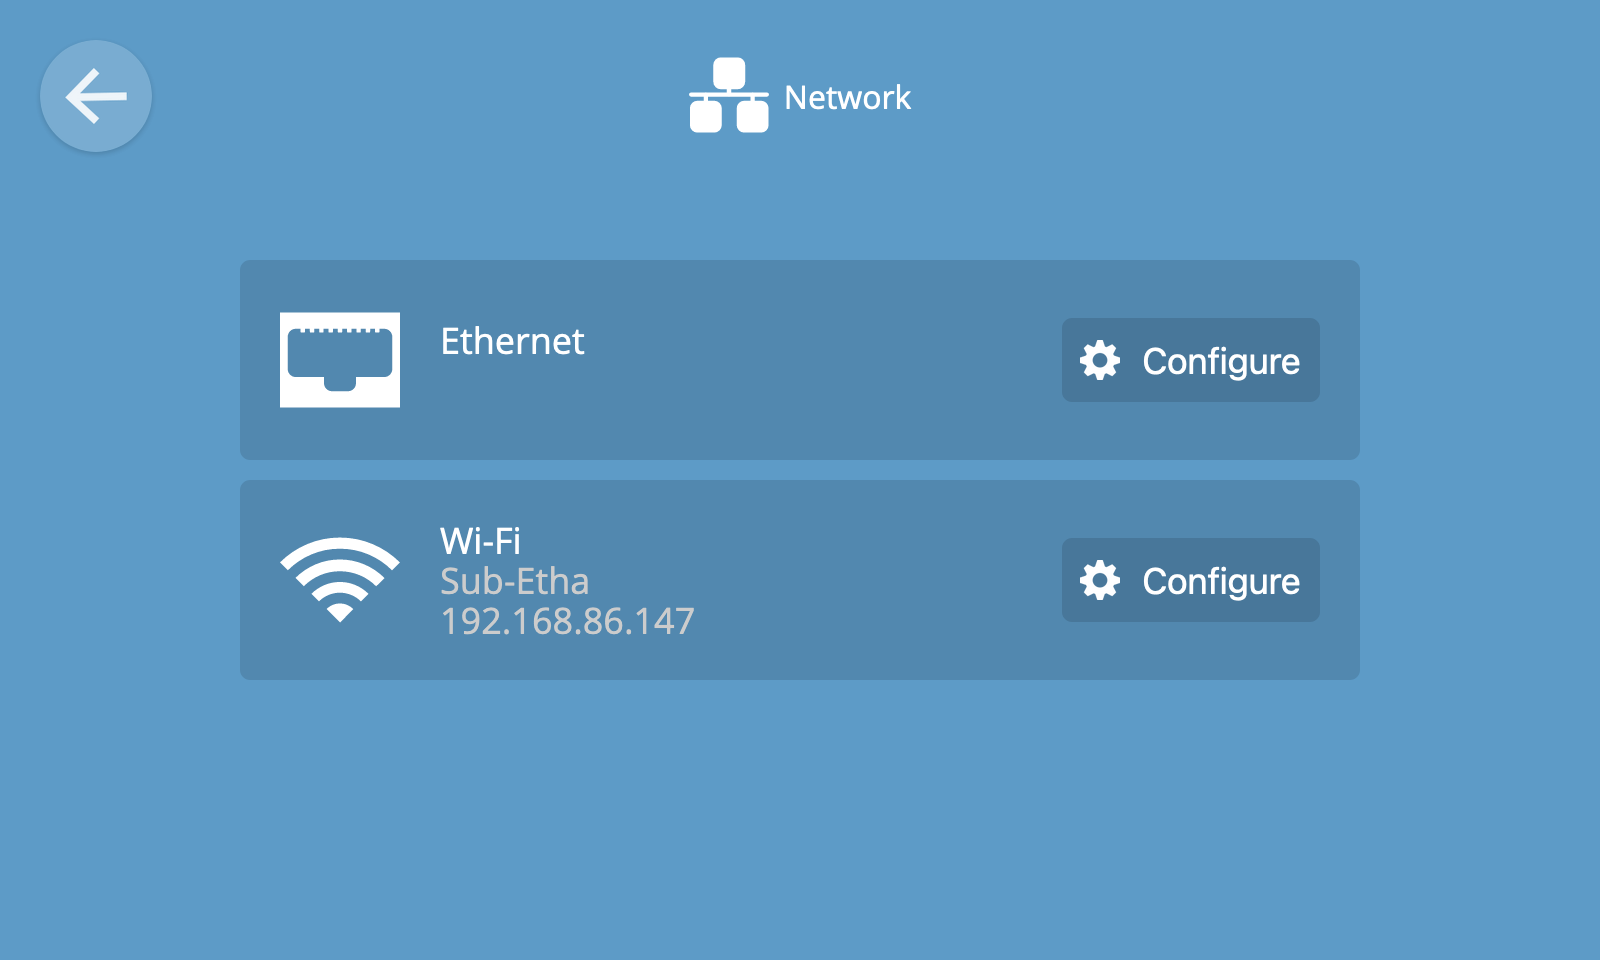 Screenshot showing the Network Settings view, which shows an overview of current Ethernet and Wi-Fi settings, and buttons to configure them